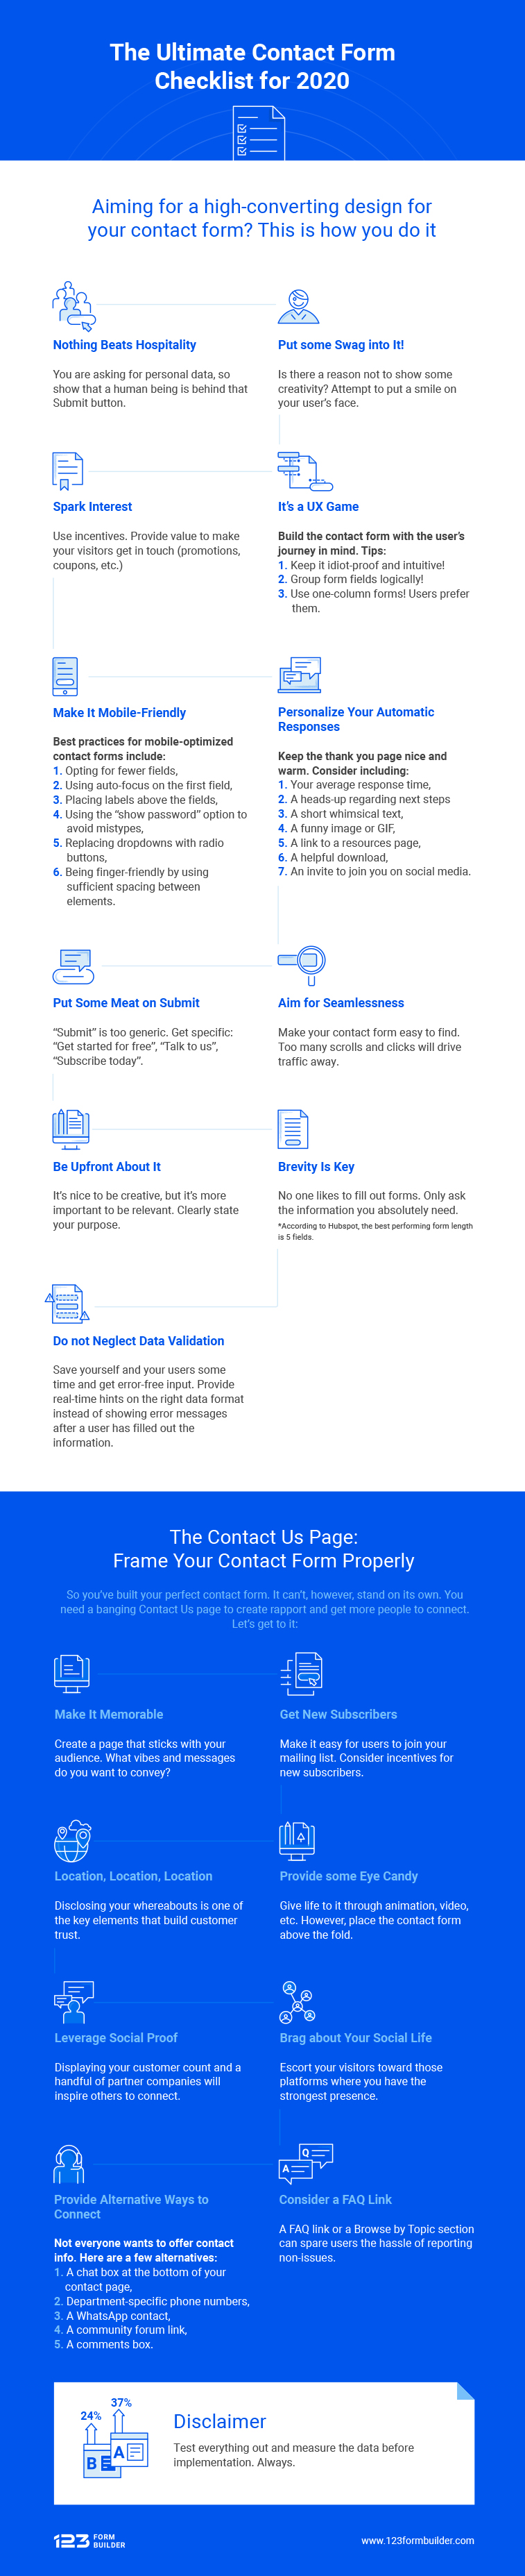 Infographic with tips for a high-converting contact page.